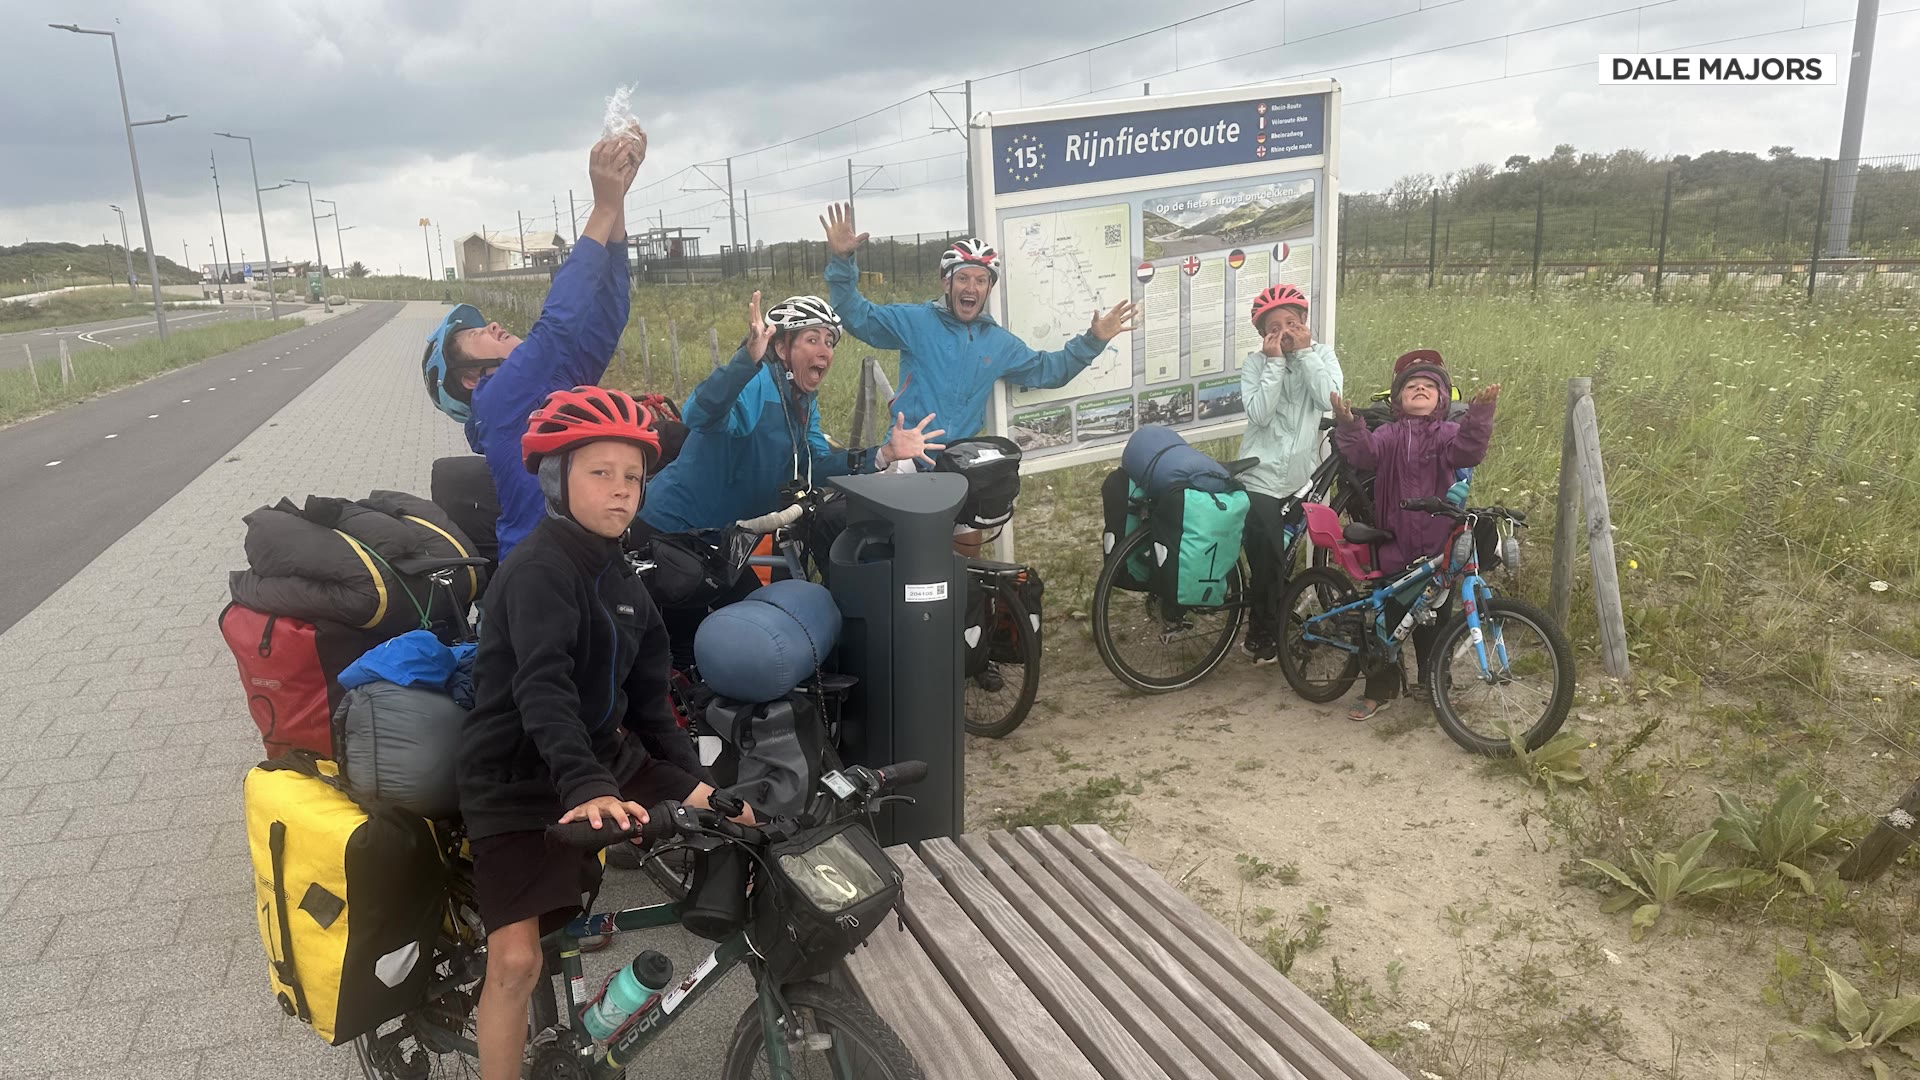 Dale Majors and his family biked over 1,800 miles in Europe....